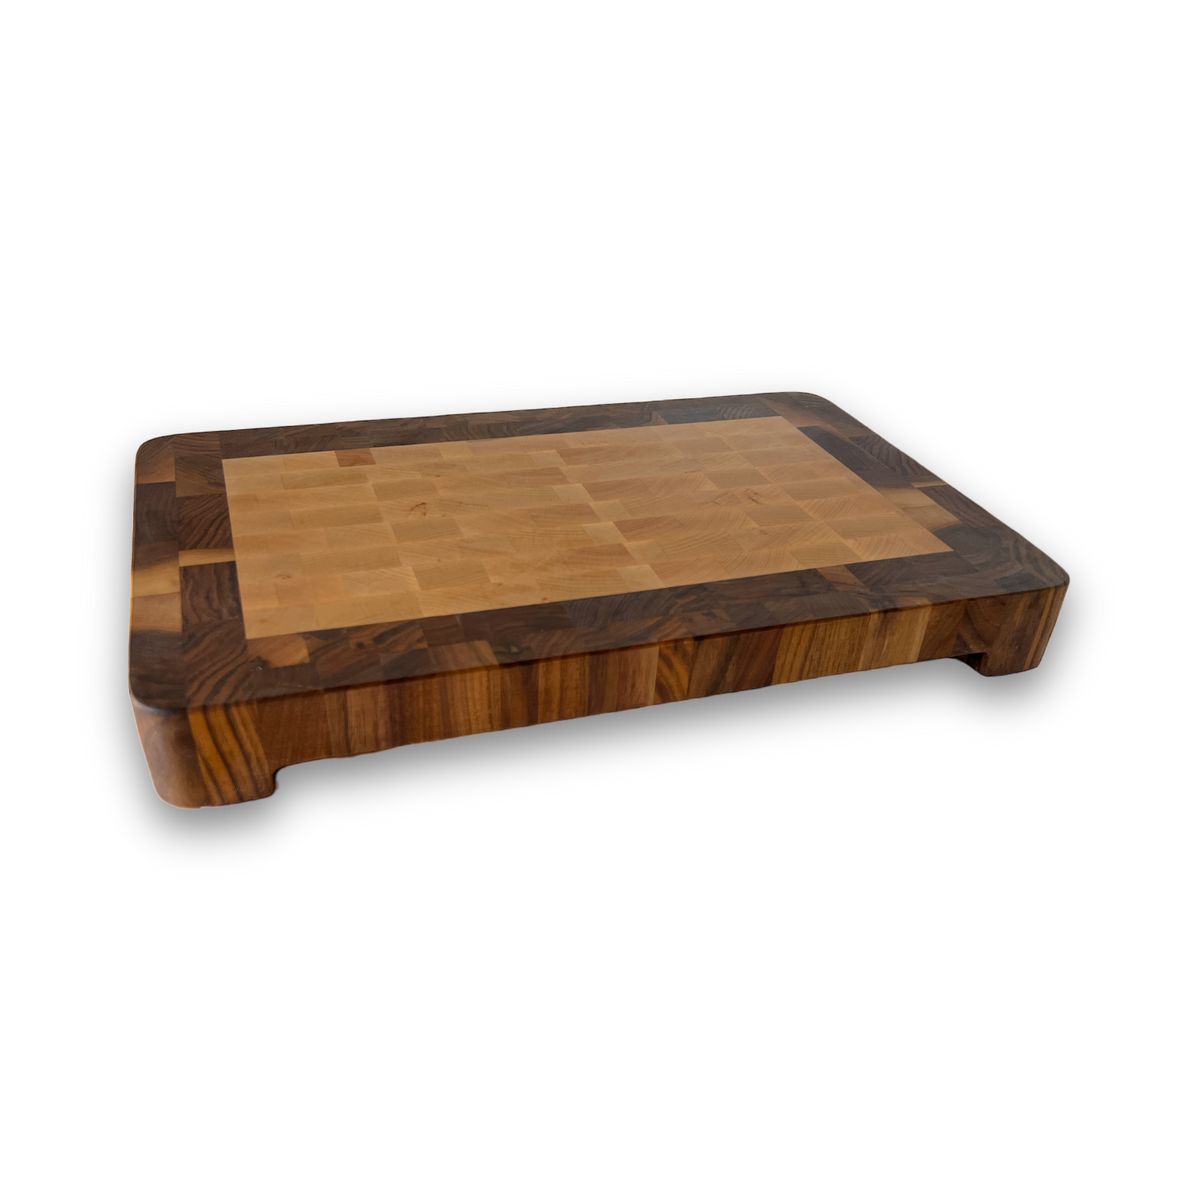 Professional End Grain Chopping Block By John Mcleod Made In The Usa 